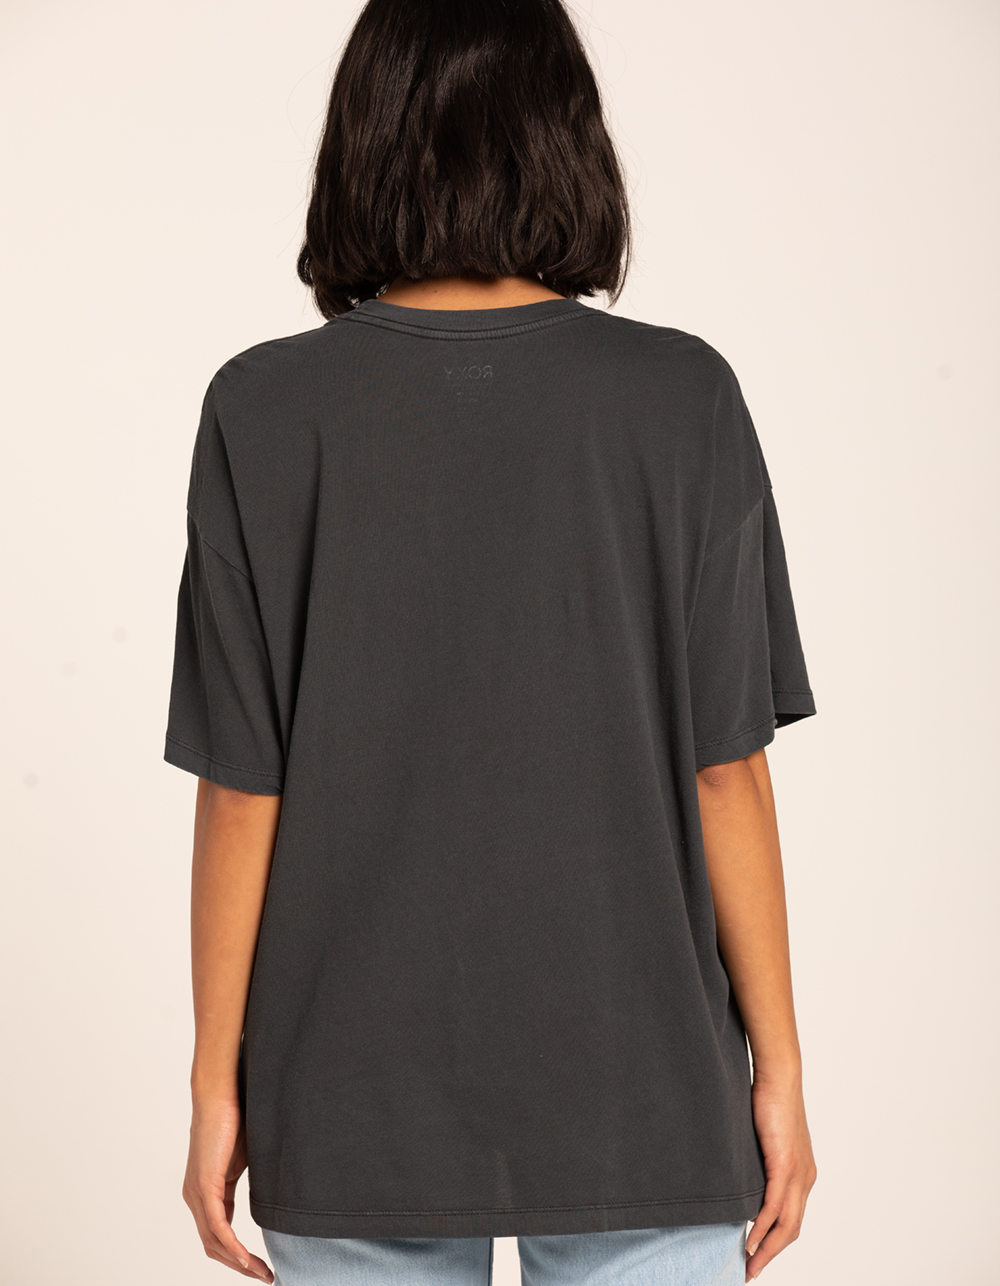 ROXY 1990 Womens Oversized Tee - WASHED BLACK | Tillys